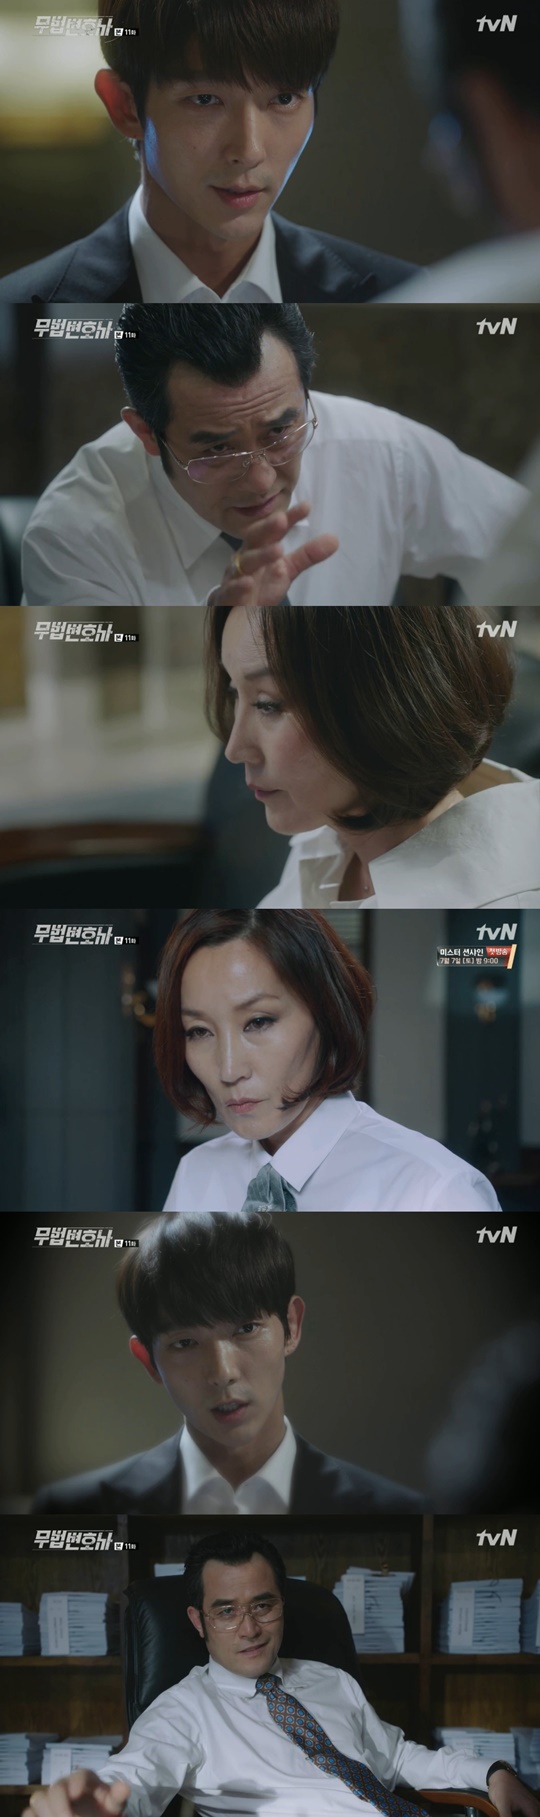 In the lawless lawyer, Lee Joon-gi shook Choi Min-soo and Lee Hye-Yeong.On the TVN weekend drama Outlaw Attorney (playplayed by Yoon Hyun-ho, directed by Kim Jin-min) broadcast on the 16th, Bong Sang-pil (Lee Joon-gi) was shown shaking An Oh-ju (Choi Min-soo) and Cha Moon-sook (Lee Hye-Yeong).Bong Sang-pil visited An-oh (Choi Min-soo) and warned him. Lee Hye-Yeong visited O-ju and asked why he came to court.Oju then told him that he had been in court because of Munsuk, who showed him a photo of Shin Yi, which he had flown to him on the day of the trial.If he did not join him in the courtroom, he was threatened to expose his work 18 years ago.Moon Sook asked him if he was a full-fledged man, and he admitted it, but in fact, all of this was a lie to him.When asked why Seok Kwan-dong (Choi Dae-hoon) lied, Oh-ju said that he was a politician of Shin Yi.Sang-pil began to work on the operation to catch Mun-suk in earnest. Sang-pil infiltrated the gold coin (Seo-hwa) into the golf course with a caddy and followed Moon-suk.Unbeknownst to this fact, Moon Sook ordered the creation of a justification for Supreme Court Chief Justice Shin Yi.He tried to stop the ambition of such a man, but he warned him that he would fear revenge, but he would not revenge but judge.Oju learned that Moon Sook met Cho at the golf course, and Oju asked Nam Soon-ja (Yum Hye-ran) to come to see him.Eventually, Oju and Moon Sook became Gala Rizzatto.So Sang-pil noticed that Moon-sook and O-ju were Gala Rizzatto and tried to use them. O-ju told Sun-ja that he had only one person to look after his daughter.So, she feared that her daughter, Michelle Chen (Cha Jung Won), would become a member of the Orial of the Nakdong River, and she told Michelle Chen to keep an eye on Munsuk.Soonja, unsure that Moon Sook was rejecting himself and his daughter Michelle Chen, tried to attach it to Oju.